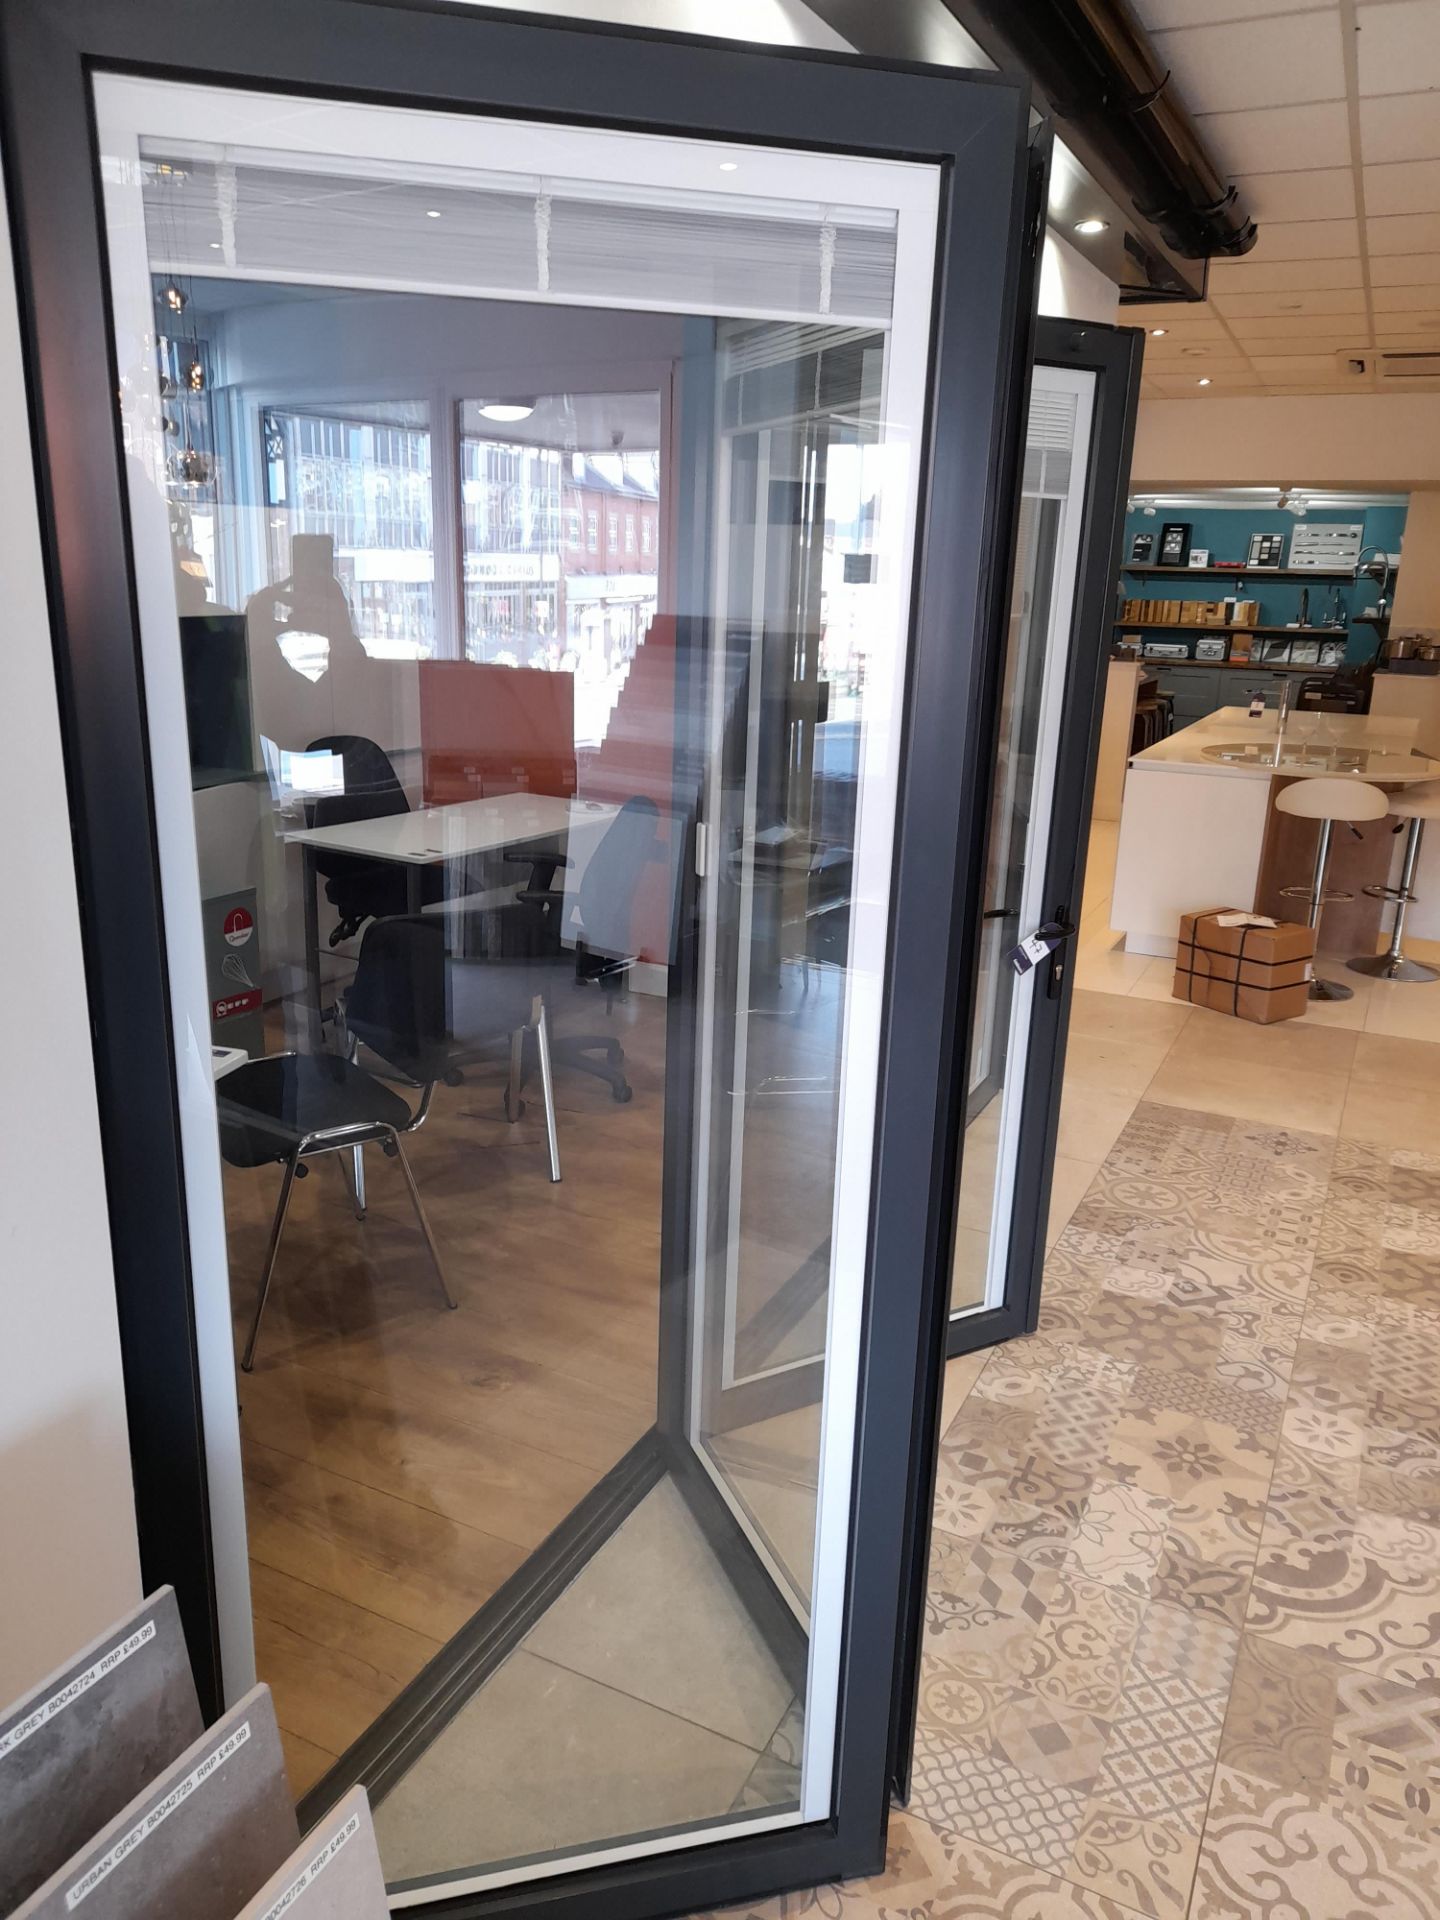 Showroom bi-fold door with integrated blinds, 3575 x 2120 (purchaser responsible to ensure safe - Image 4 of 4